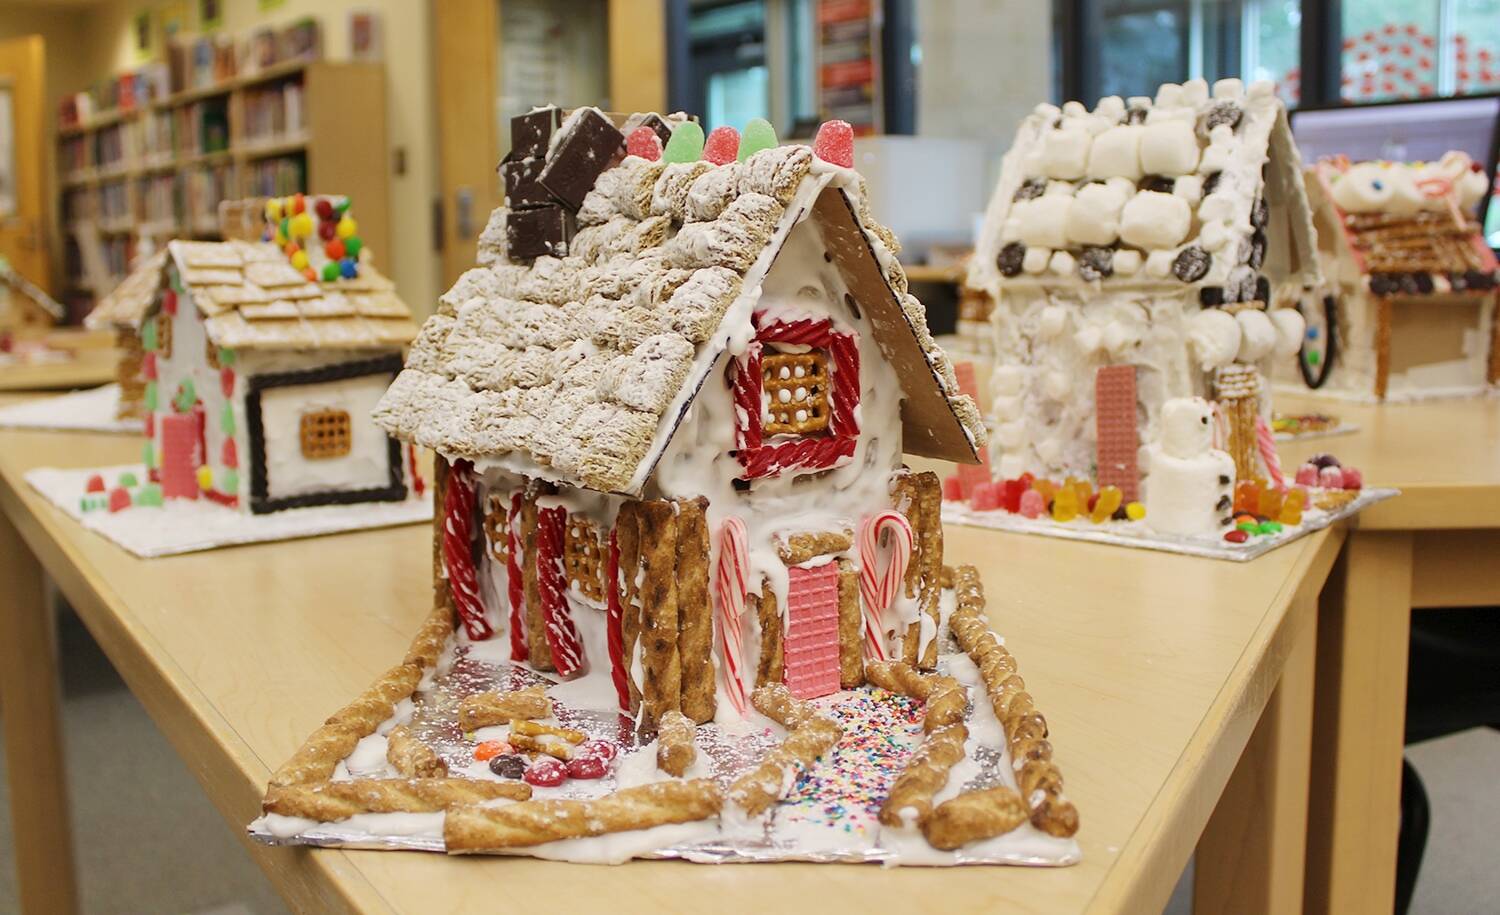 Gingerbread houses made by Bainbridge High School culinary arts students and assembled by sixth-grade students at Sakai.